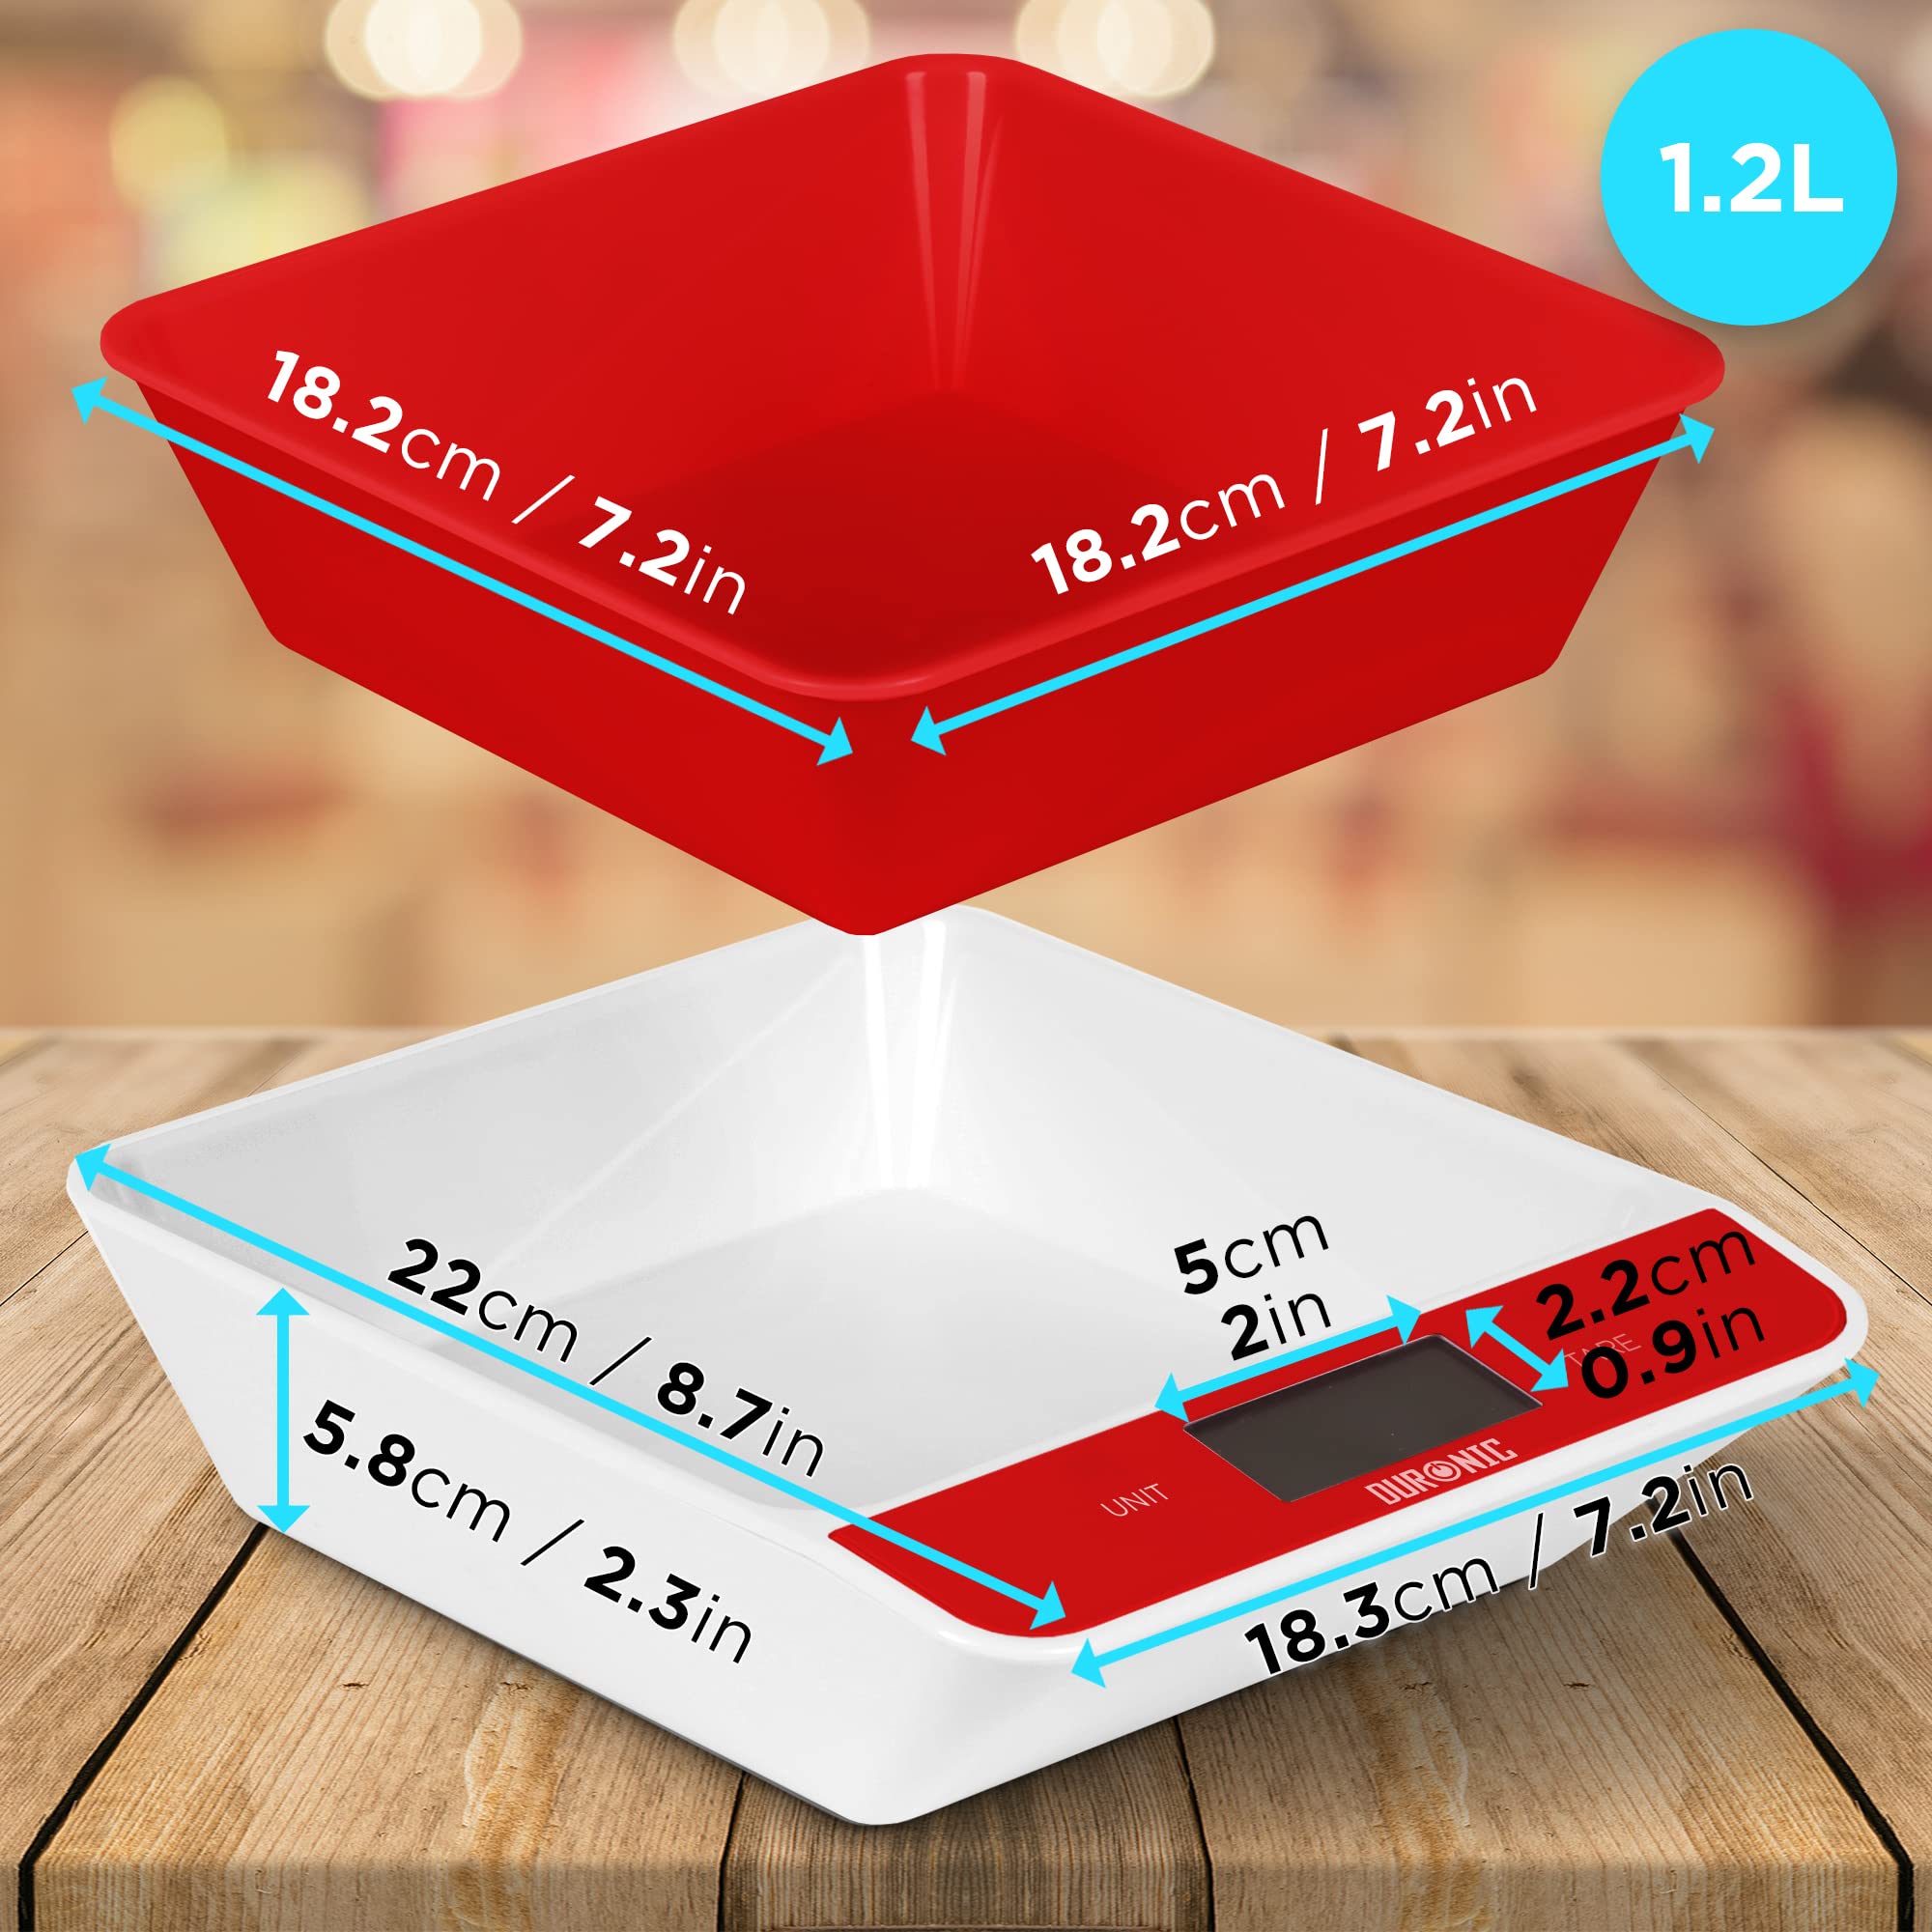 Duronic Kitchen Scales with Bowl KS100 RD for Baking Postal Parcel Weigh | Red Design with 1.2L Bowl | 5kg Capacity | Tare | 1g Precision